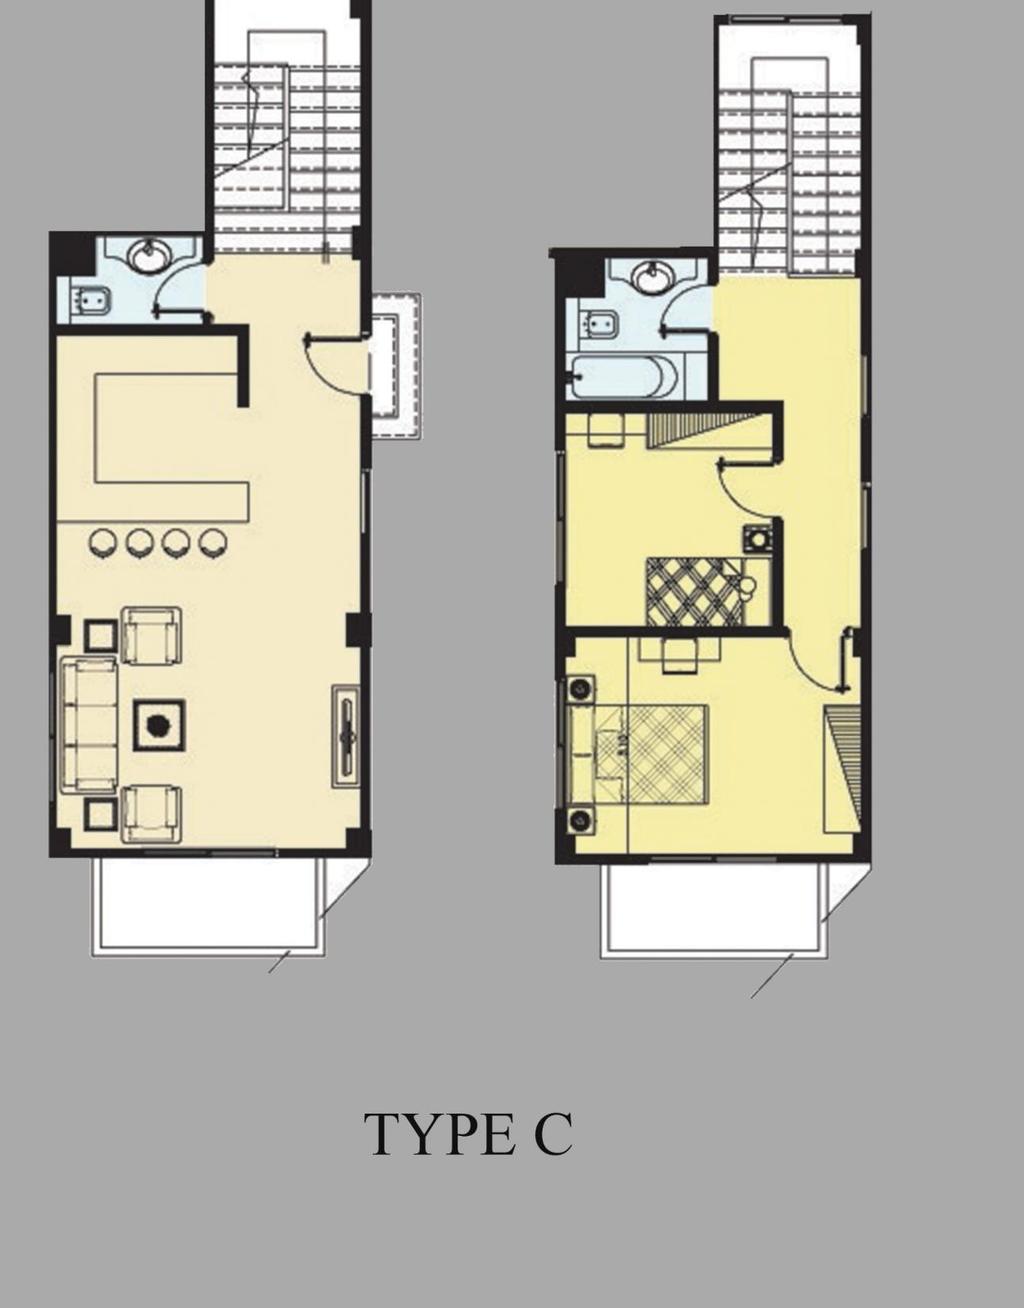 Type C Two bed room apartment Unit Size: 190 sqm Duplex Price Starts at